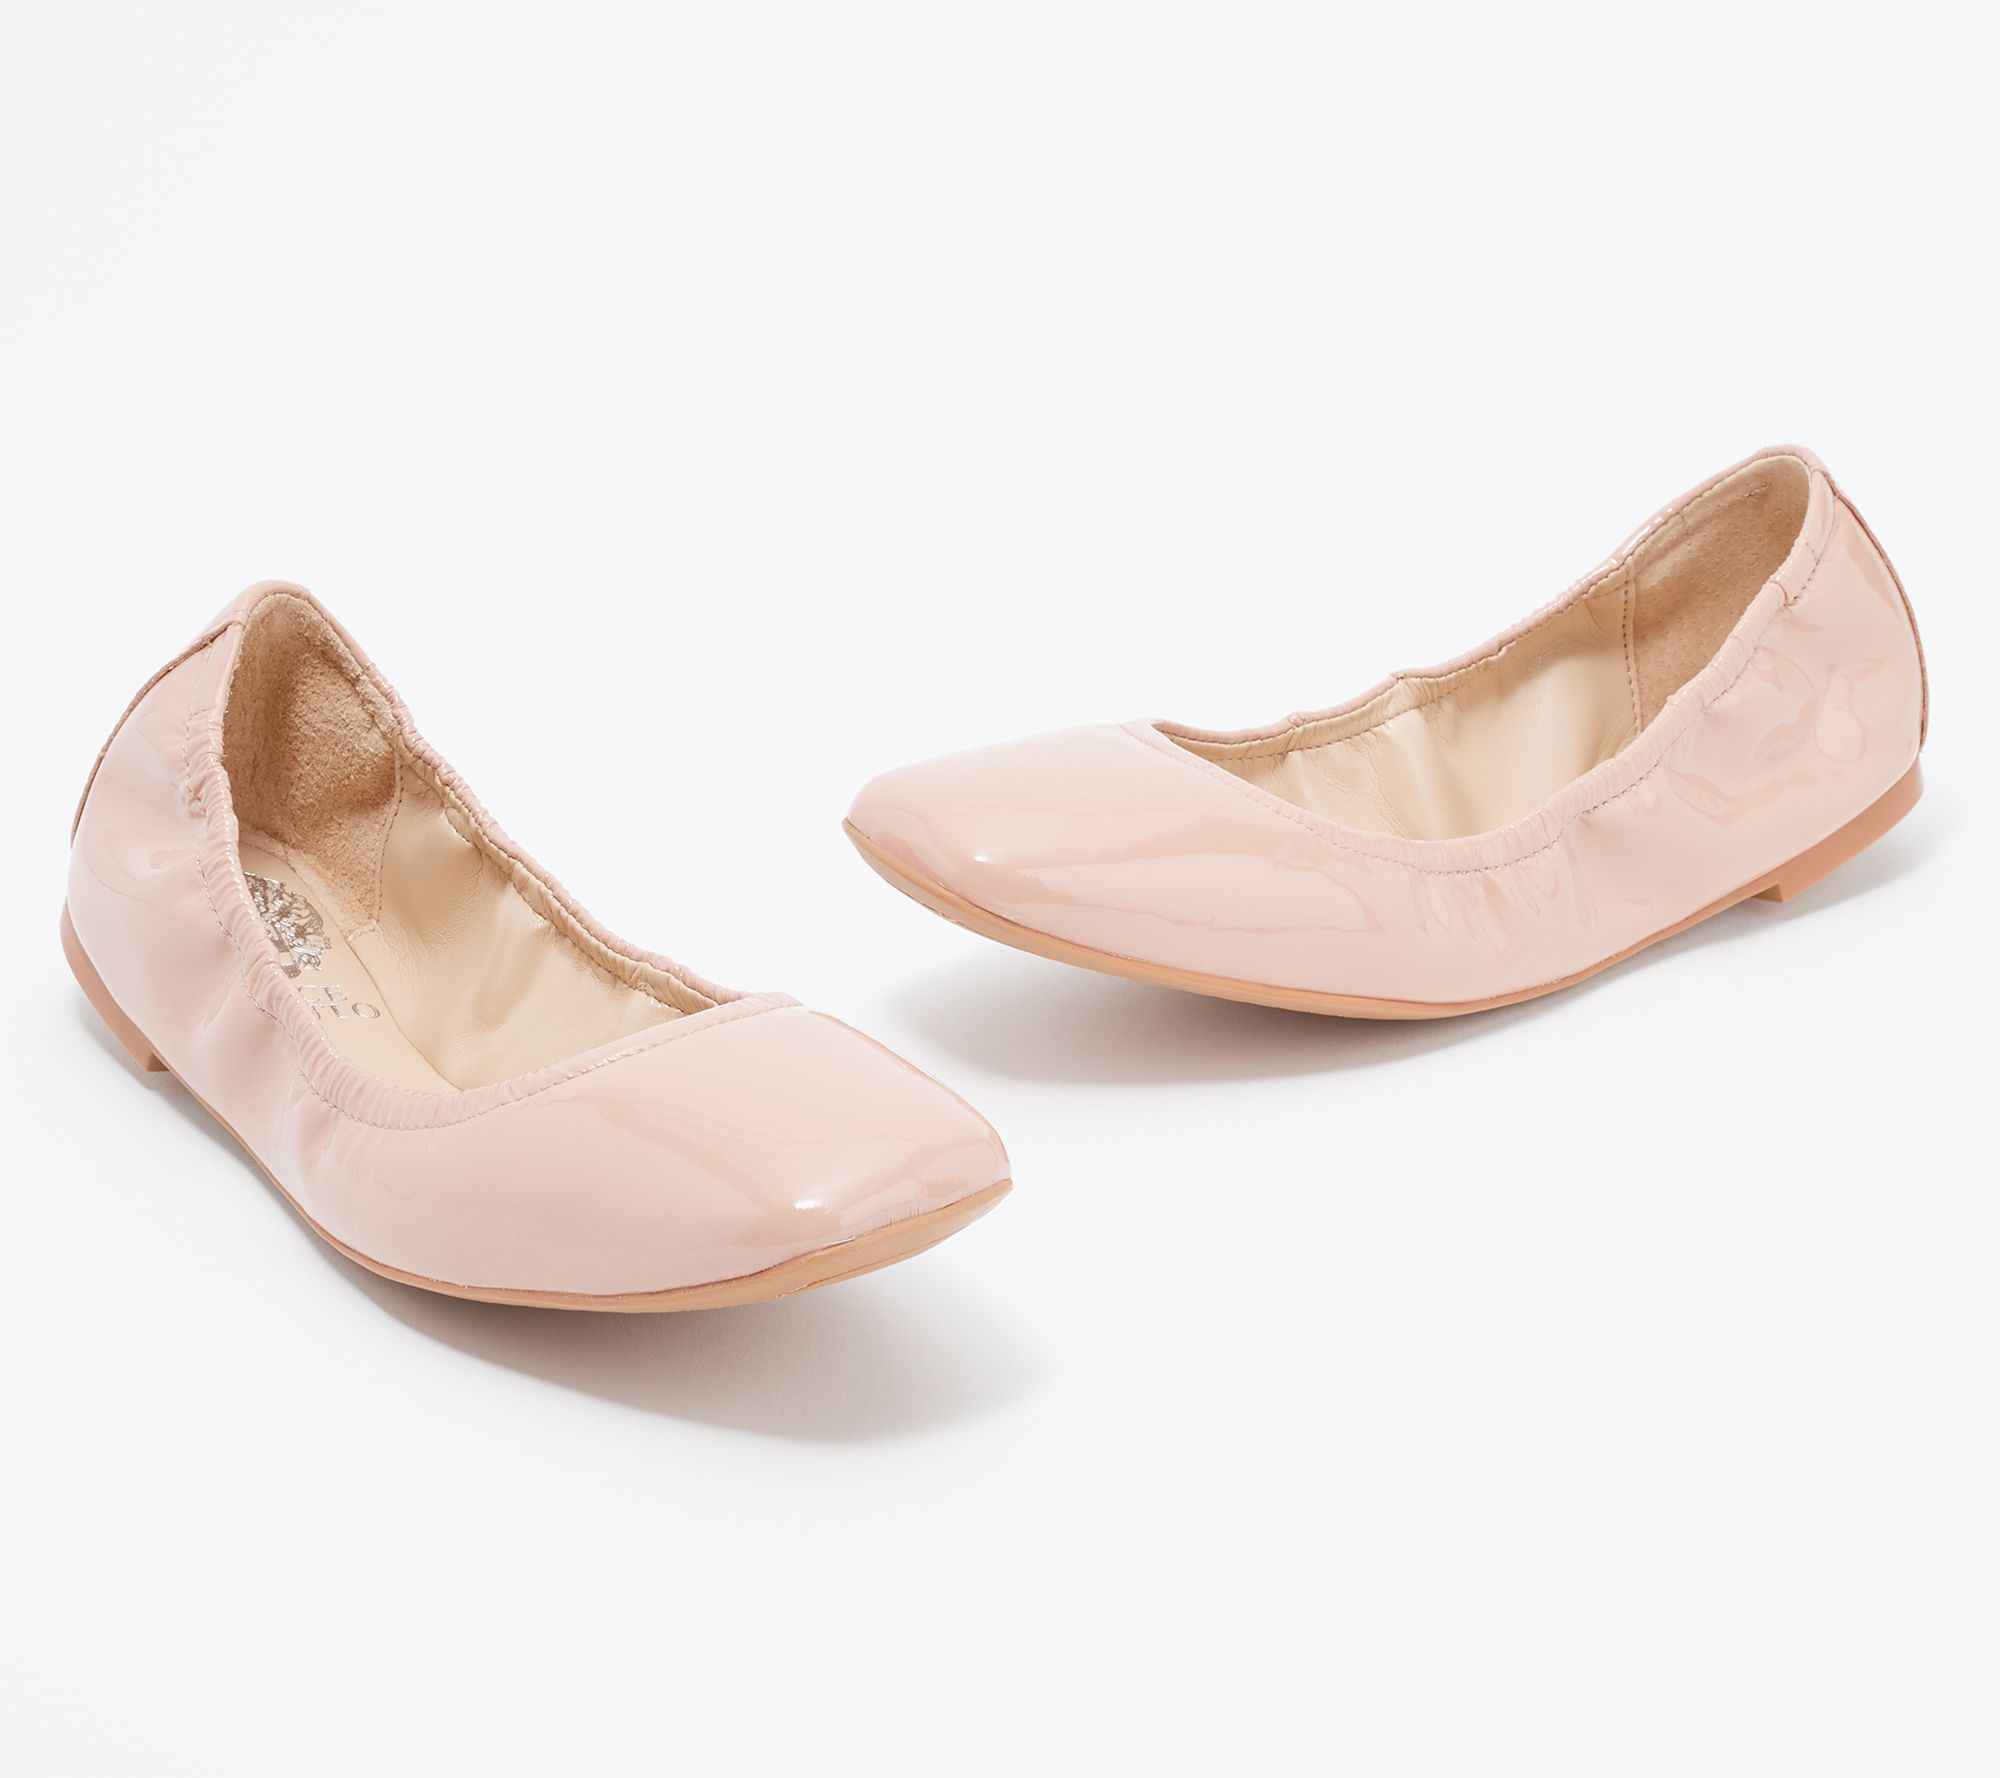 Vince Camuto Leather Ballet Flats 